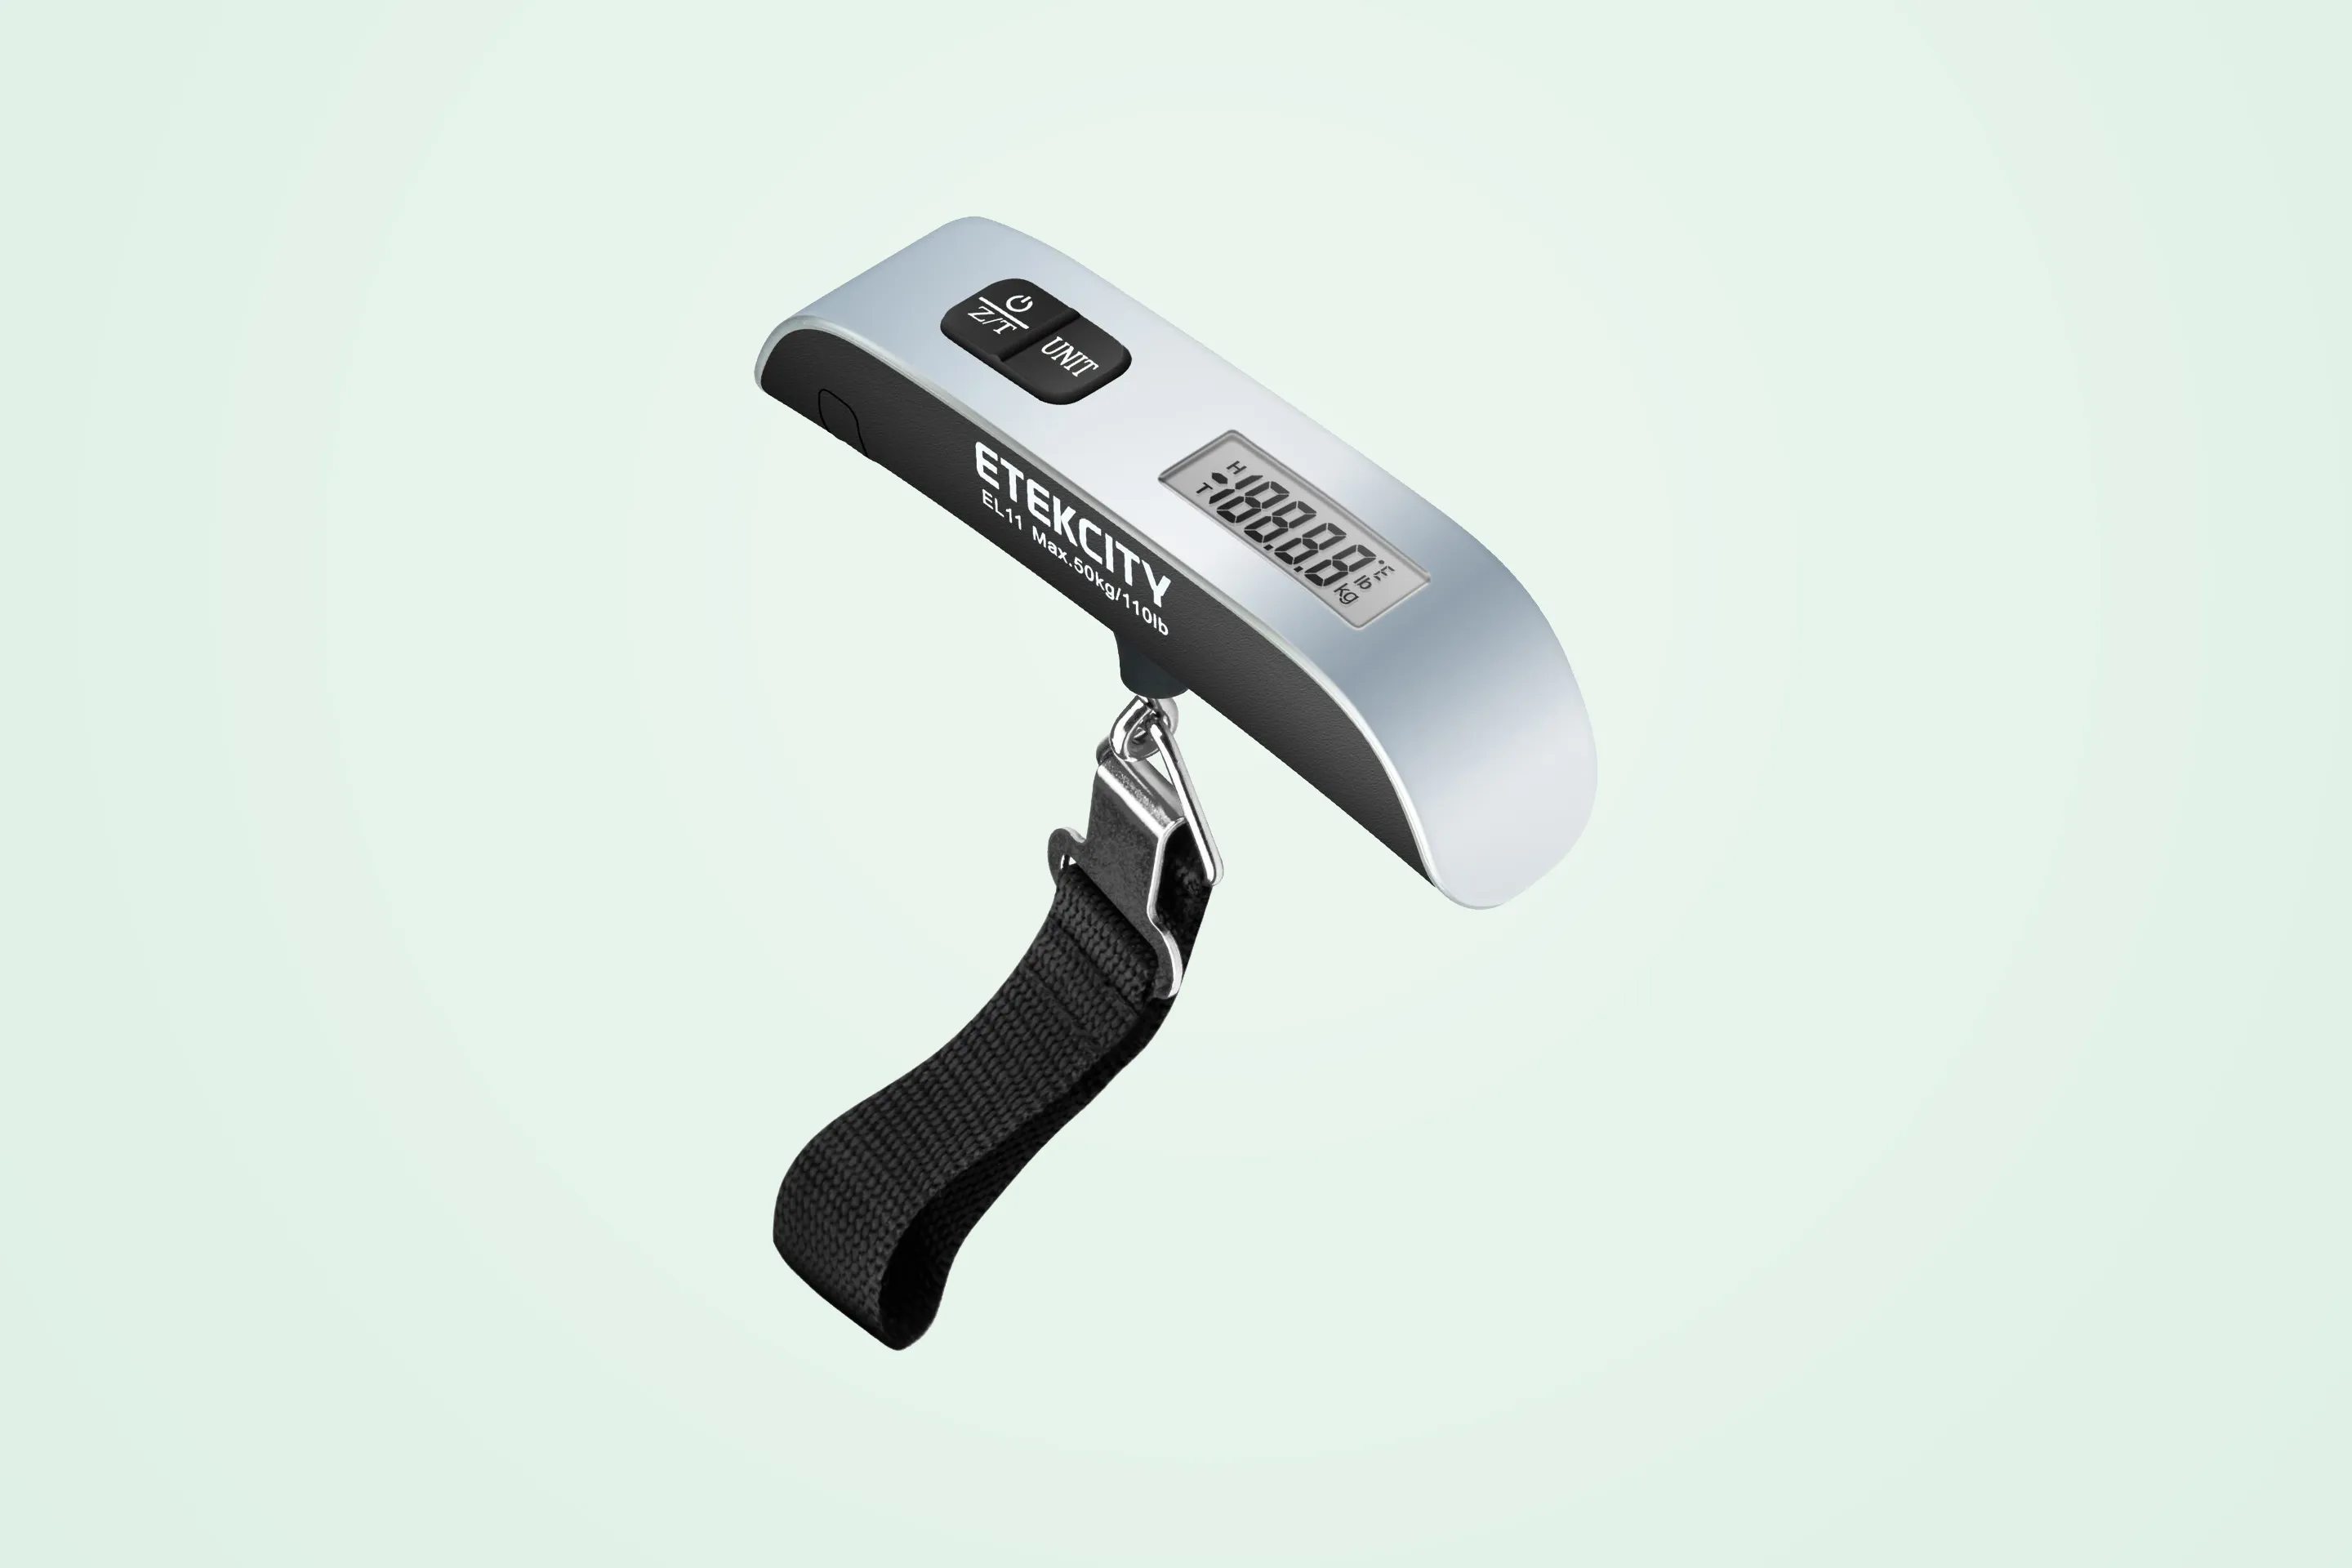 Link Digital Luggage Scale Must HaveTravel Accessory Upto 110LBS